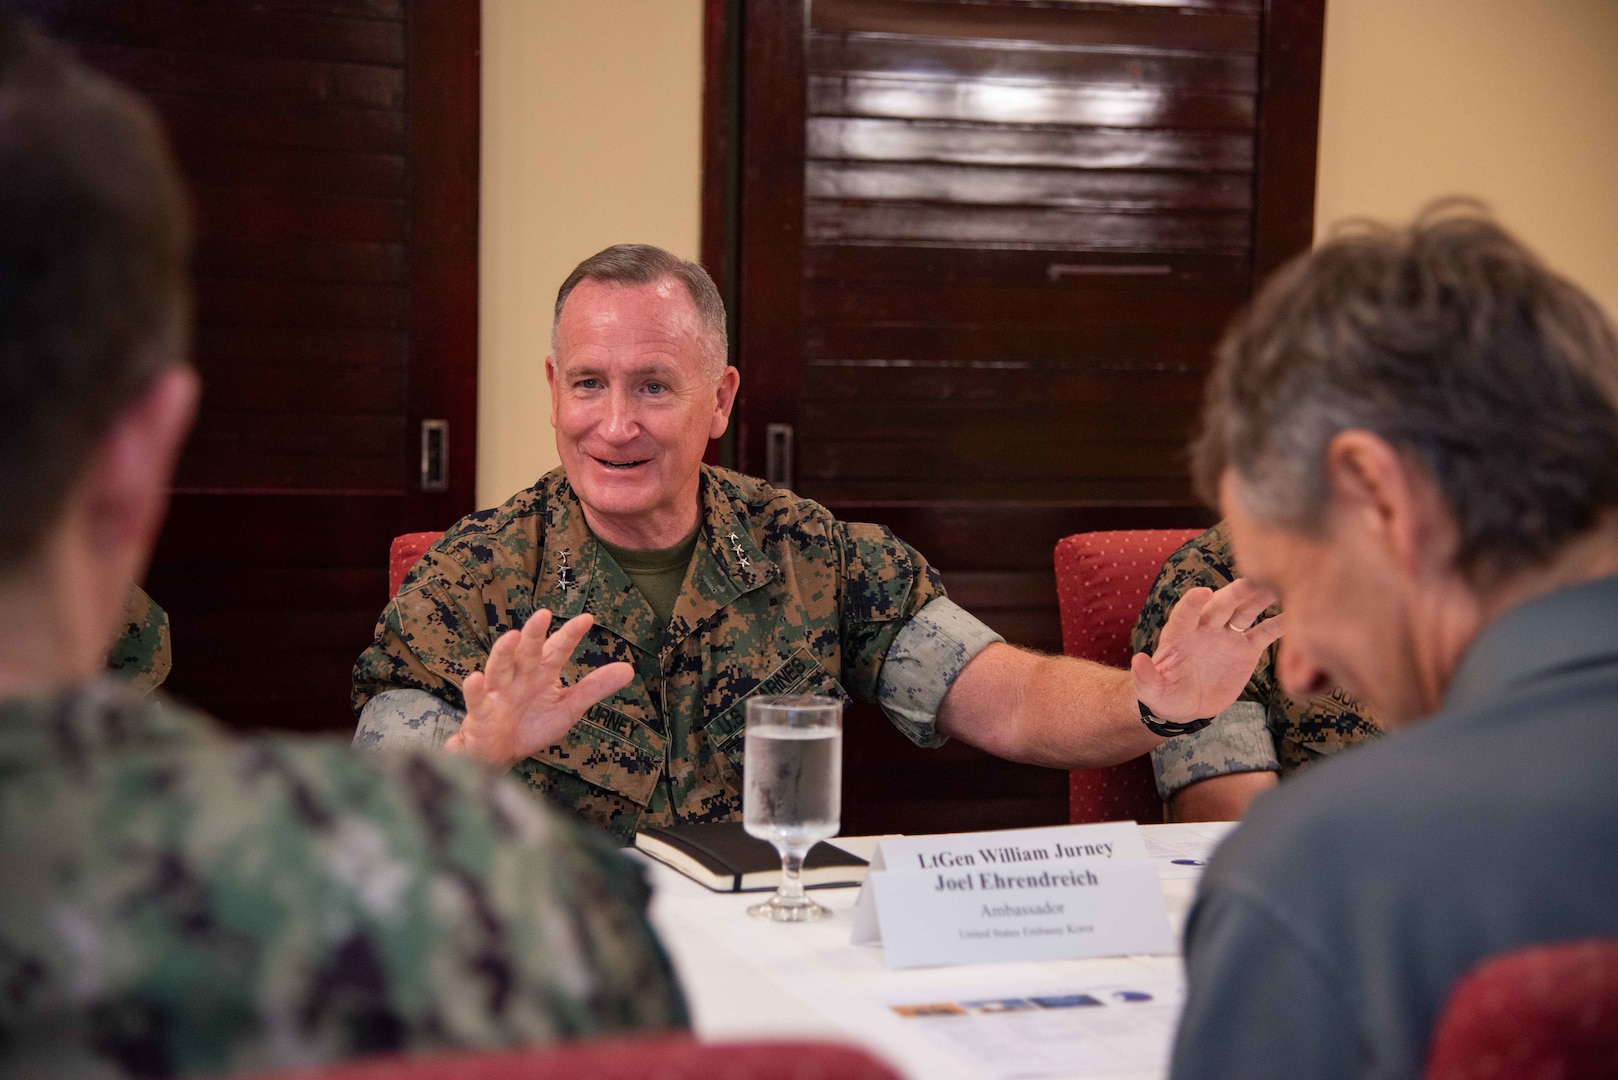 U.S. Marine Corps Lt. Gen. William M. Jurney, commander, U.S. Marine Corps Forces, Pacific, speaks with U.S. Ambassador for the Republic of Palau Joel Ehrendreich and members of the U.S. Embassy during a country team brief at the Palau Royal Resort, Apr. 25. Jurney traveled to Palau to meet with local and military leaders to discuss regional defense partnerships and opportunities. Palau is one of the Compact of Free Association states aligned with the United States, which provides defense, funding, and access to social services. (U.S. Navy photo by Mass Communication Specialist 1st Class Samantha Jetzer)